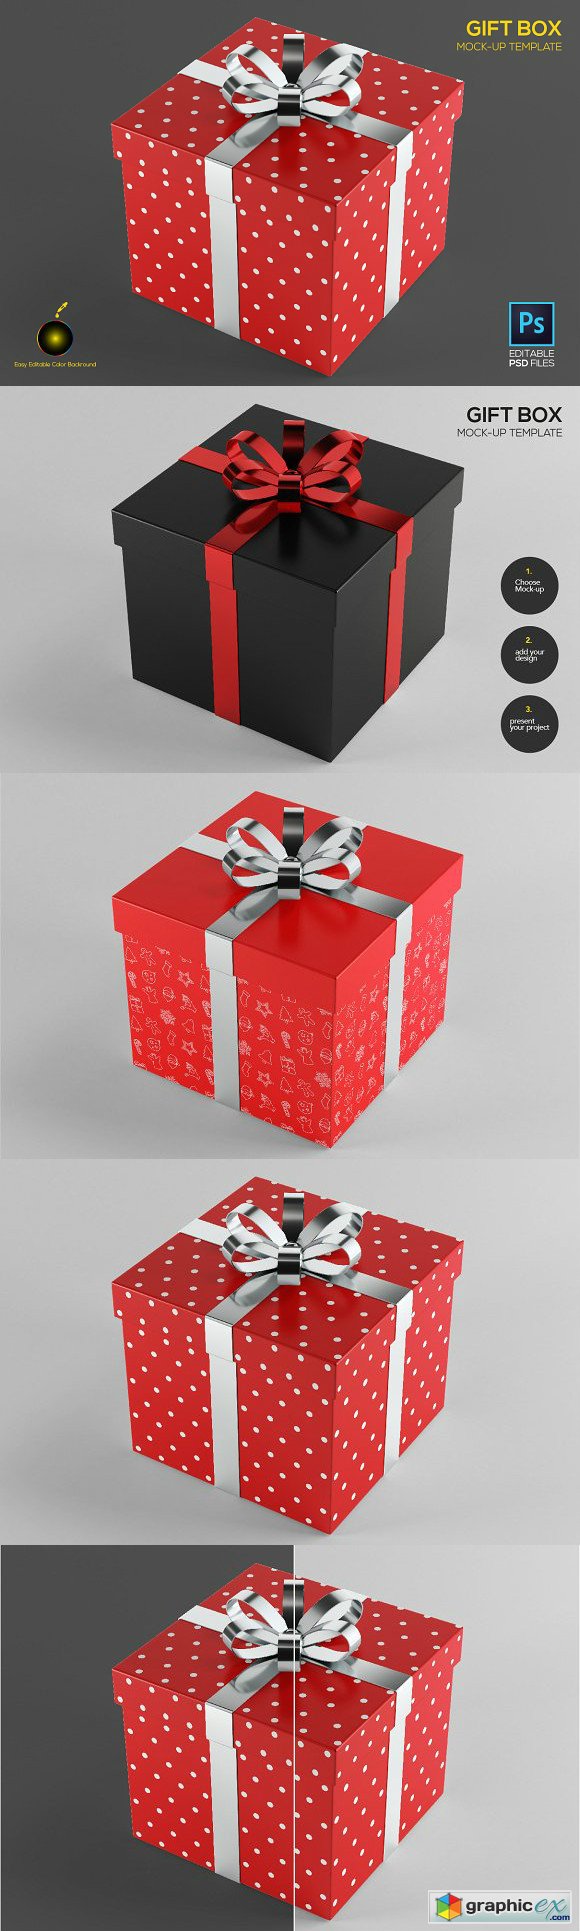 Gift Box Design Mock up Template